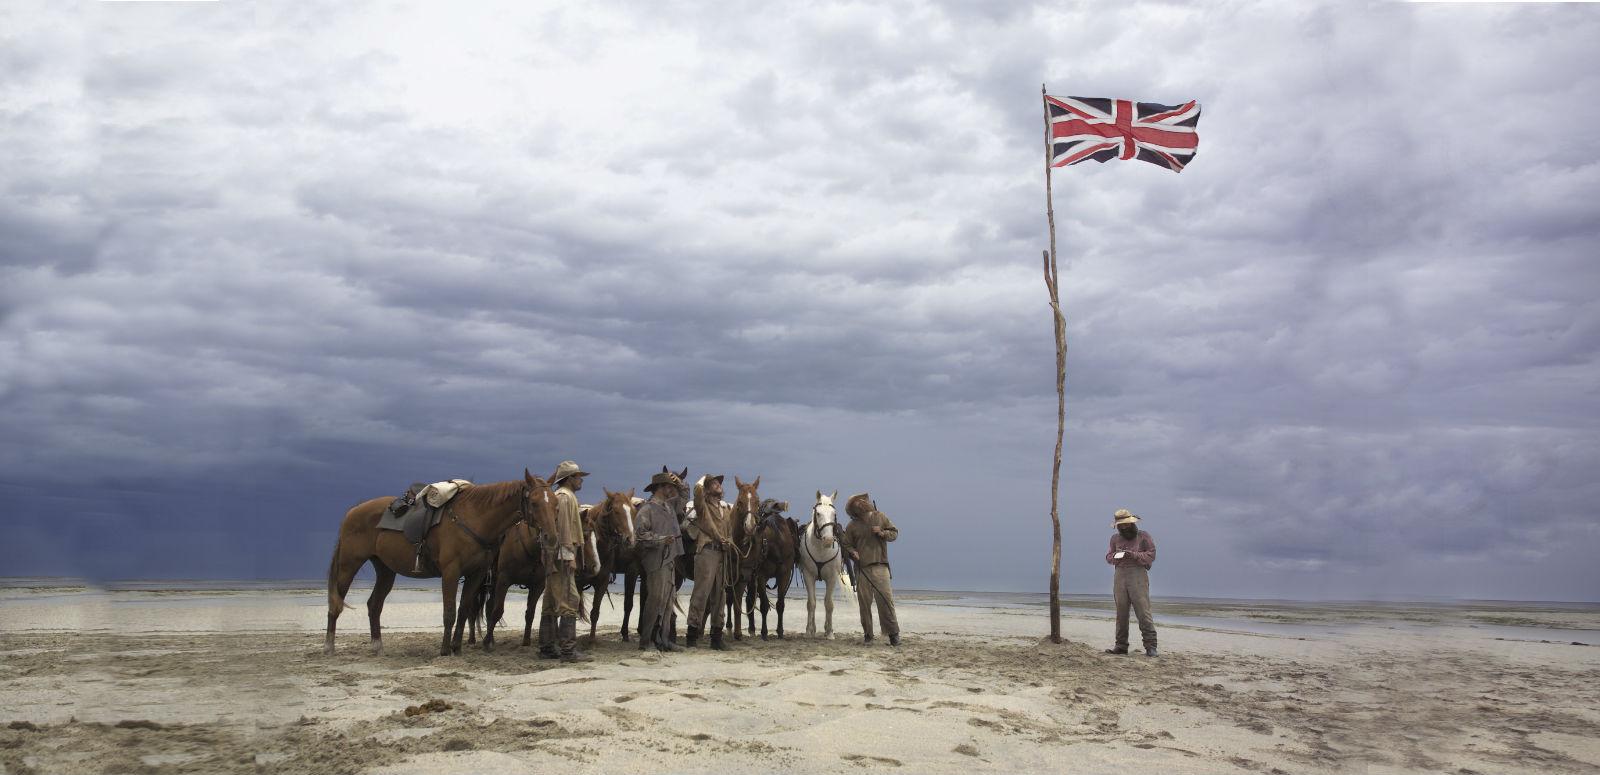 A group of men and horses standing on a plain in the Australian outback stand looking at a Union Jack flag that has been raised on a long, thin tree trunk.